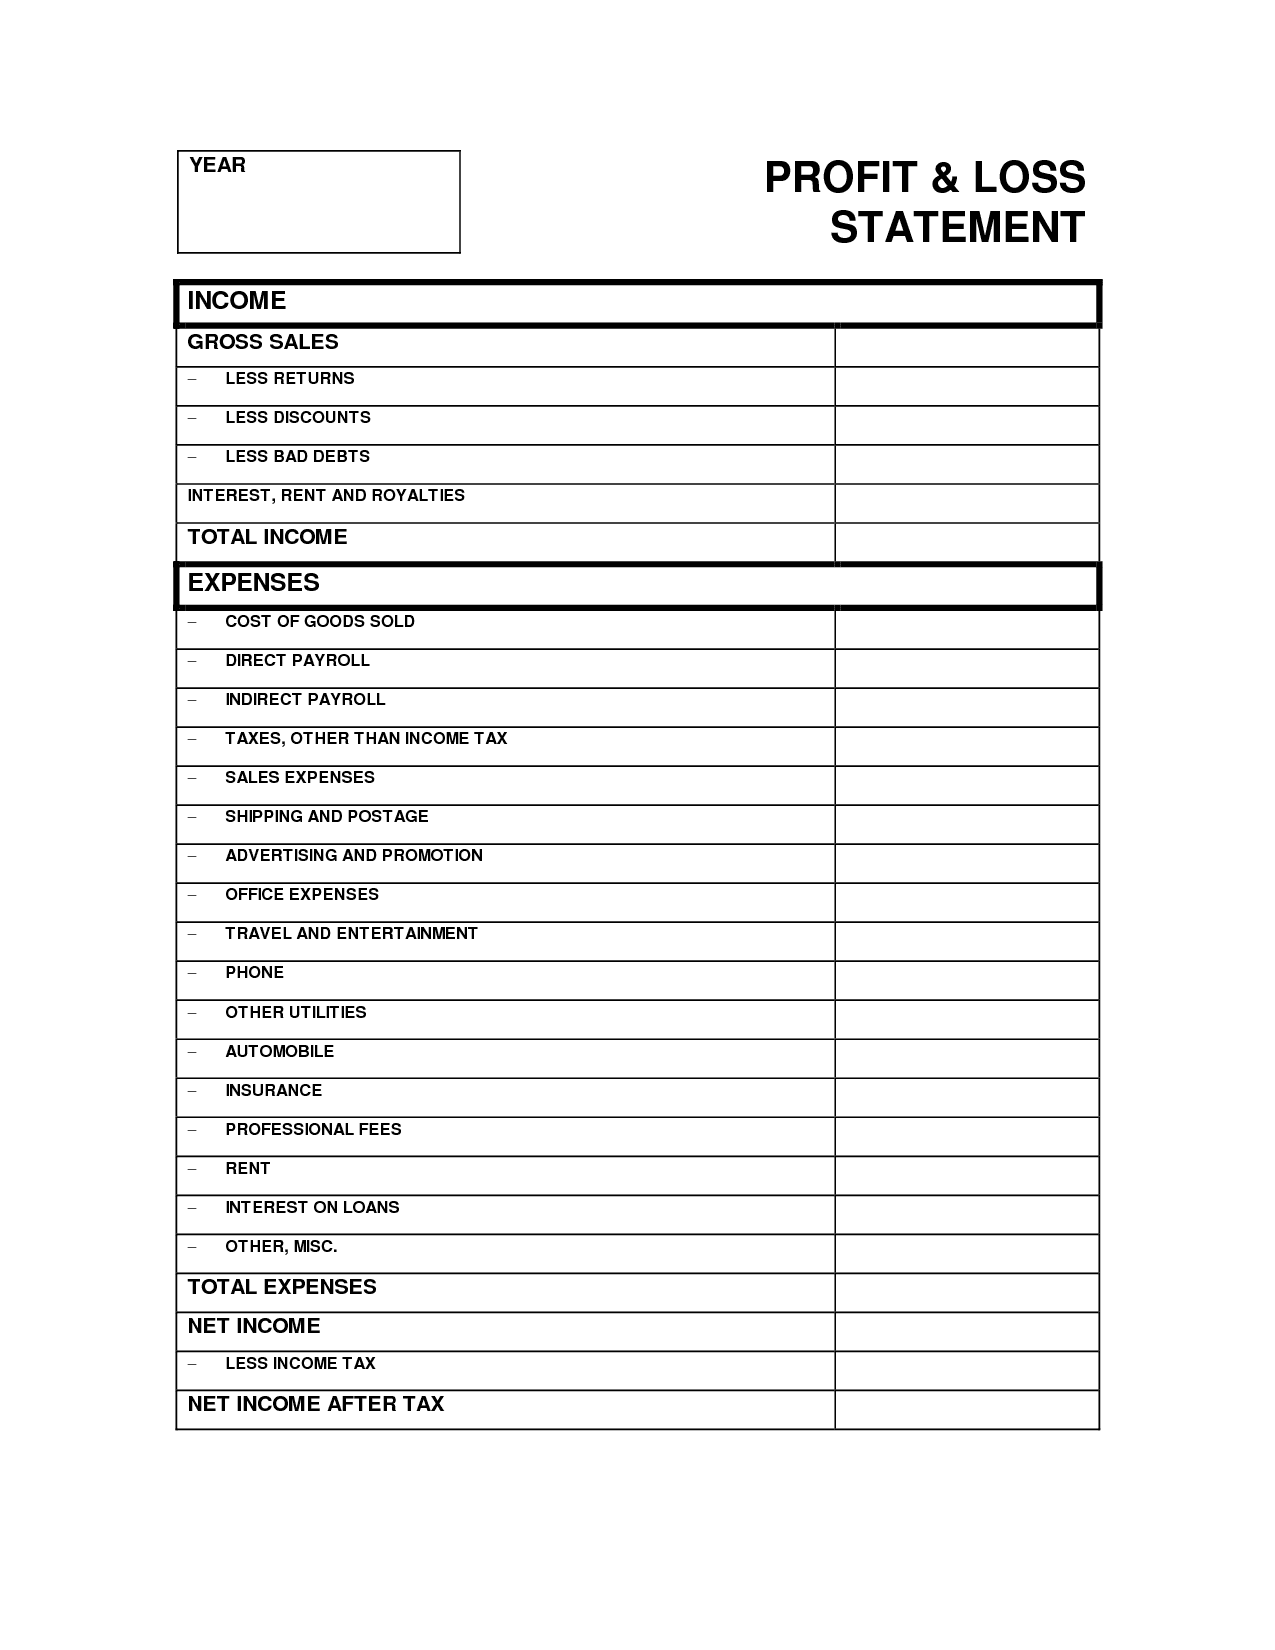 Profit And Loss Statement For Self Employed 1